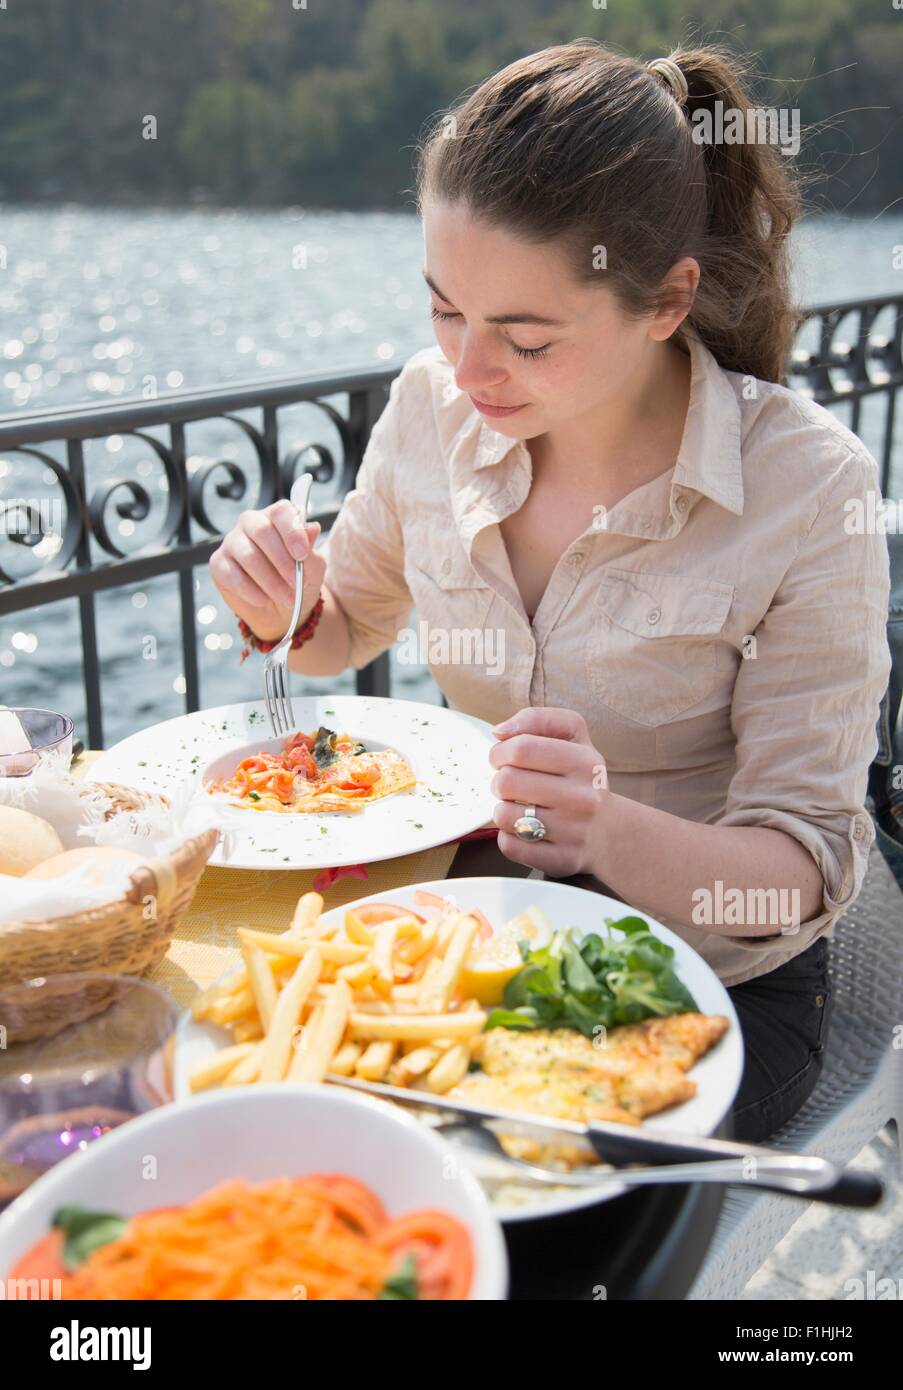 Young woman eating lunch at lakeside restaurant, Lake Mergozzo, Verbania, Piemonte, Italy Stock Photo